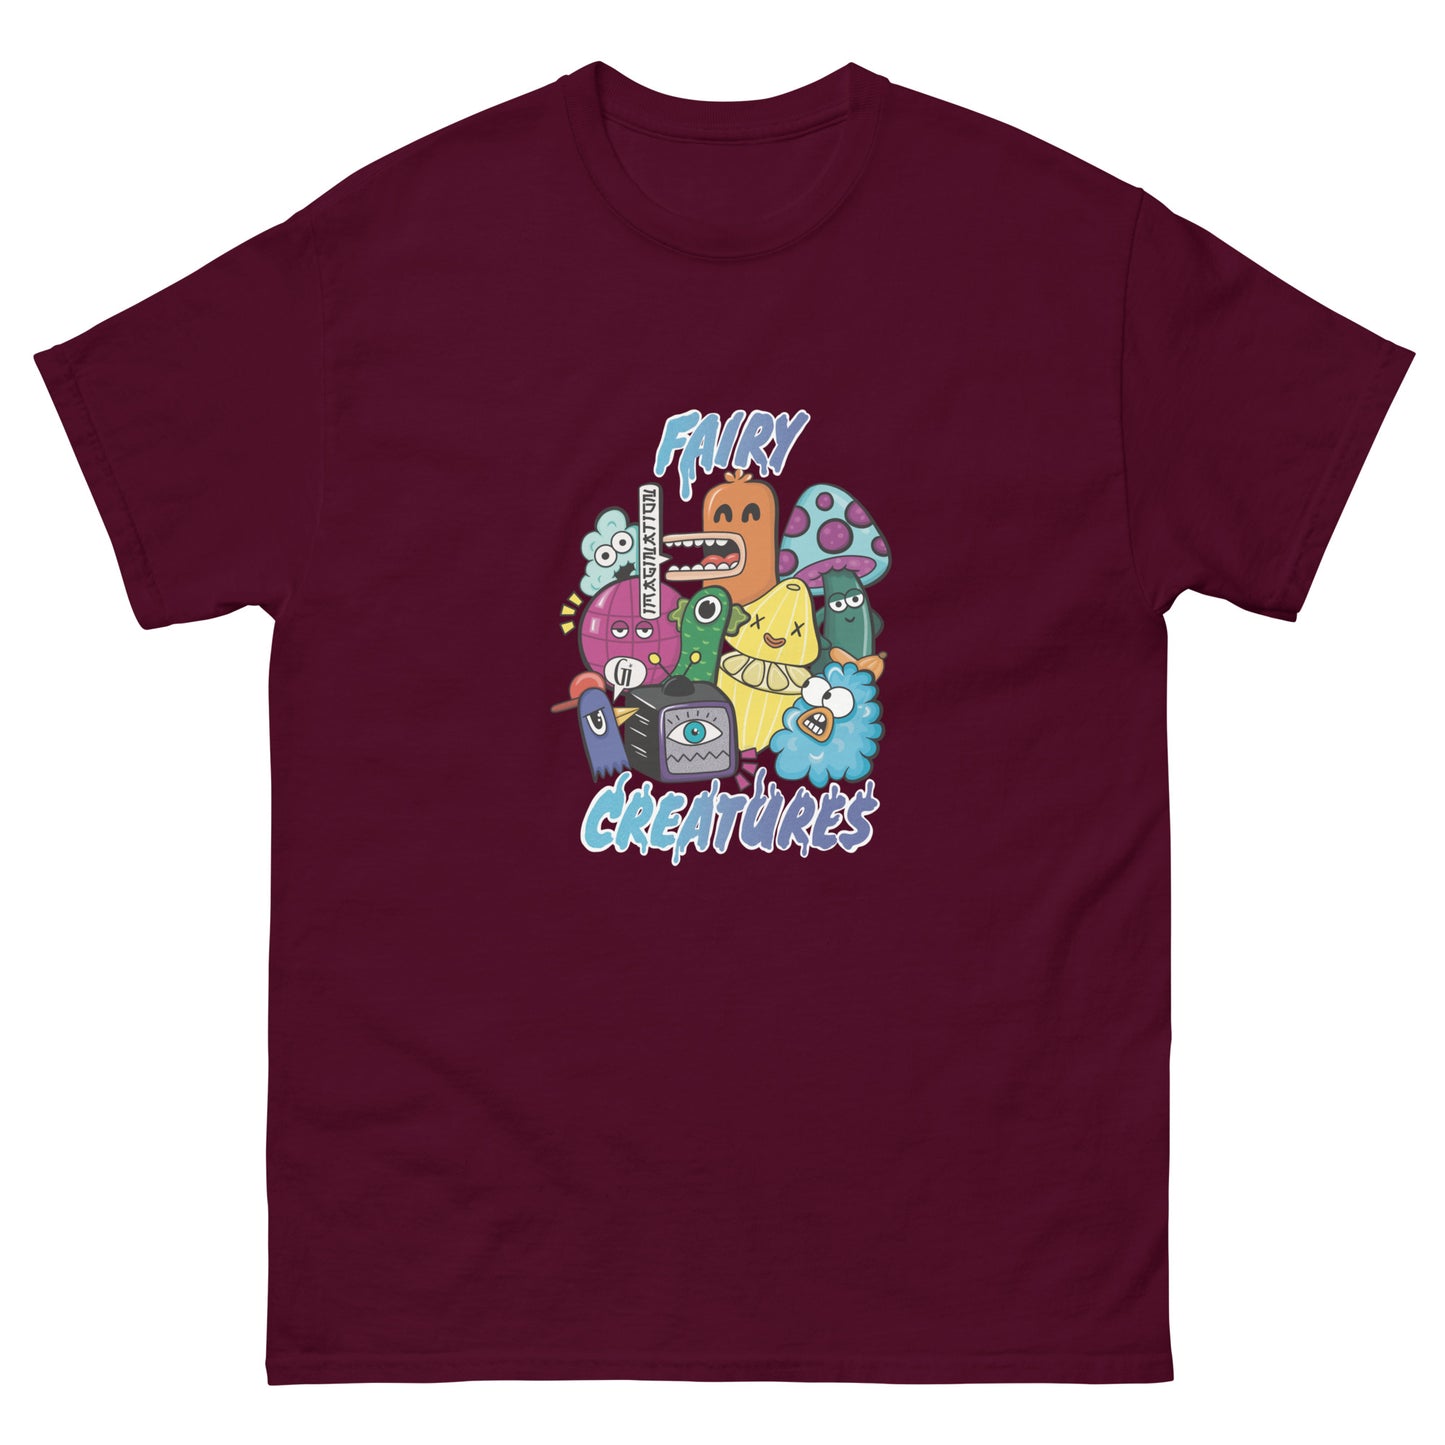 maroon color cotton t shirt with fairy creatures